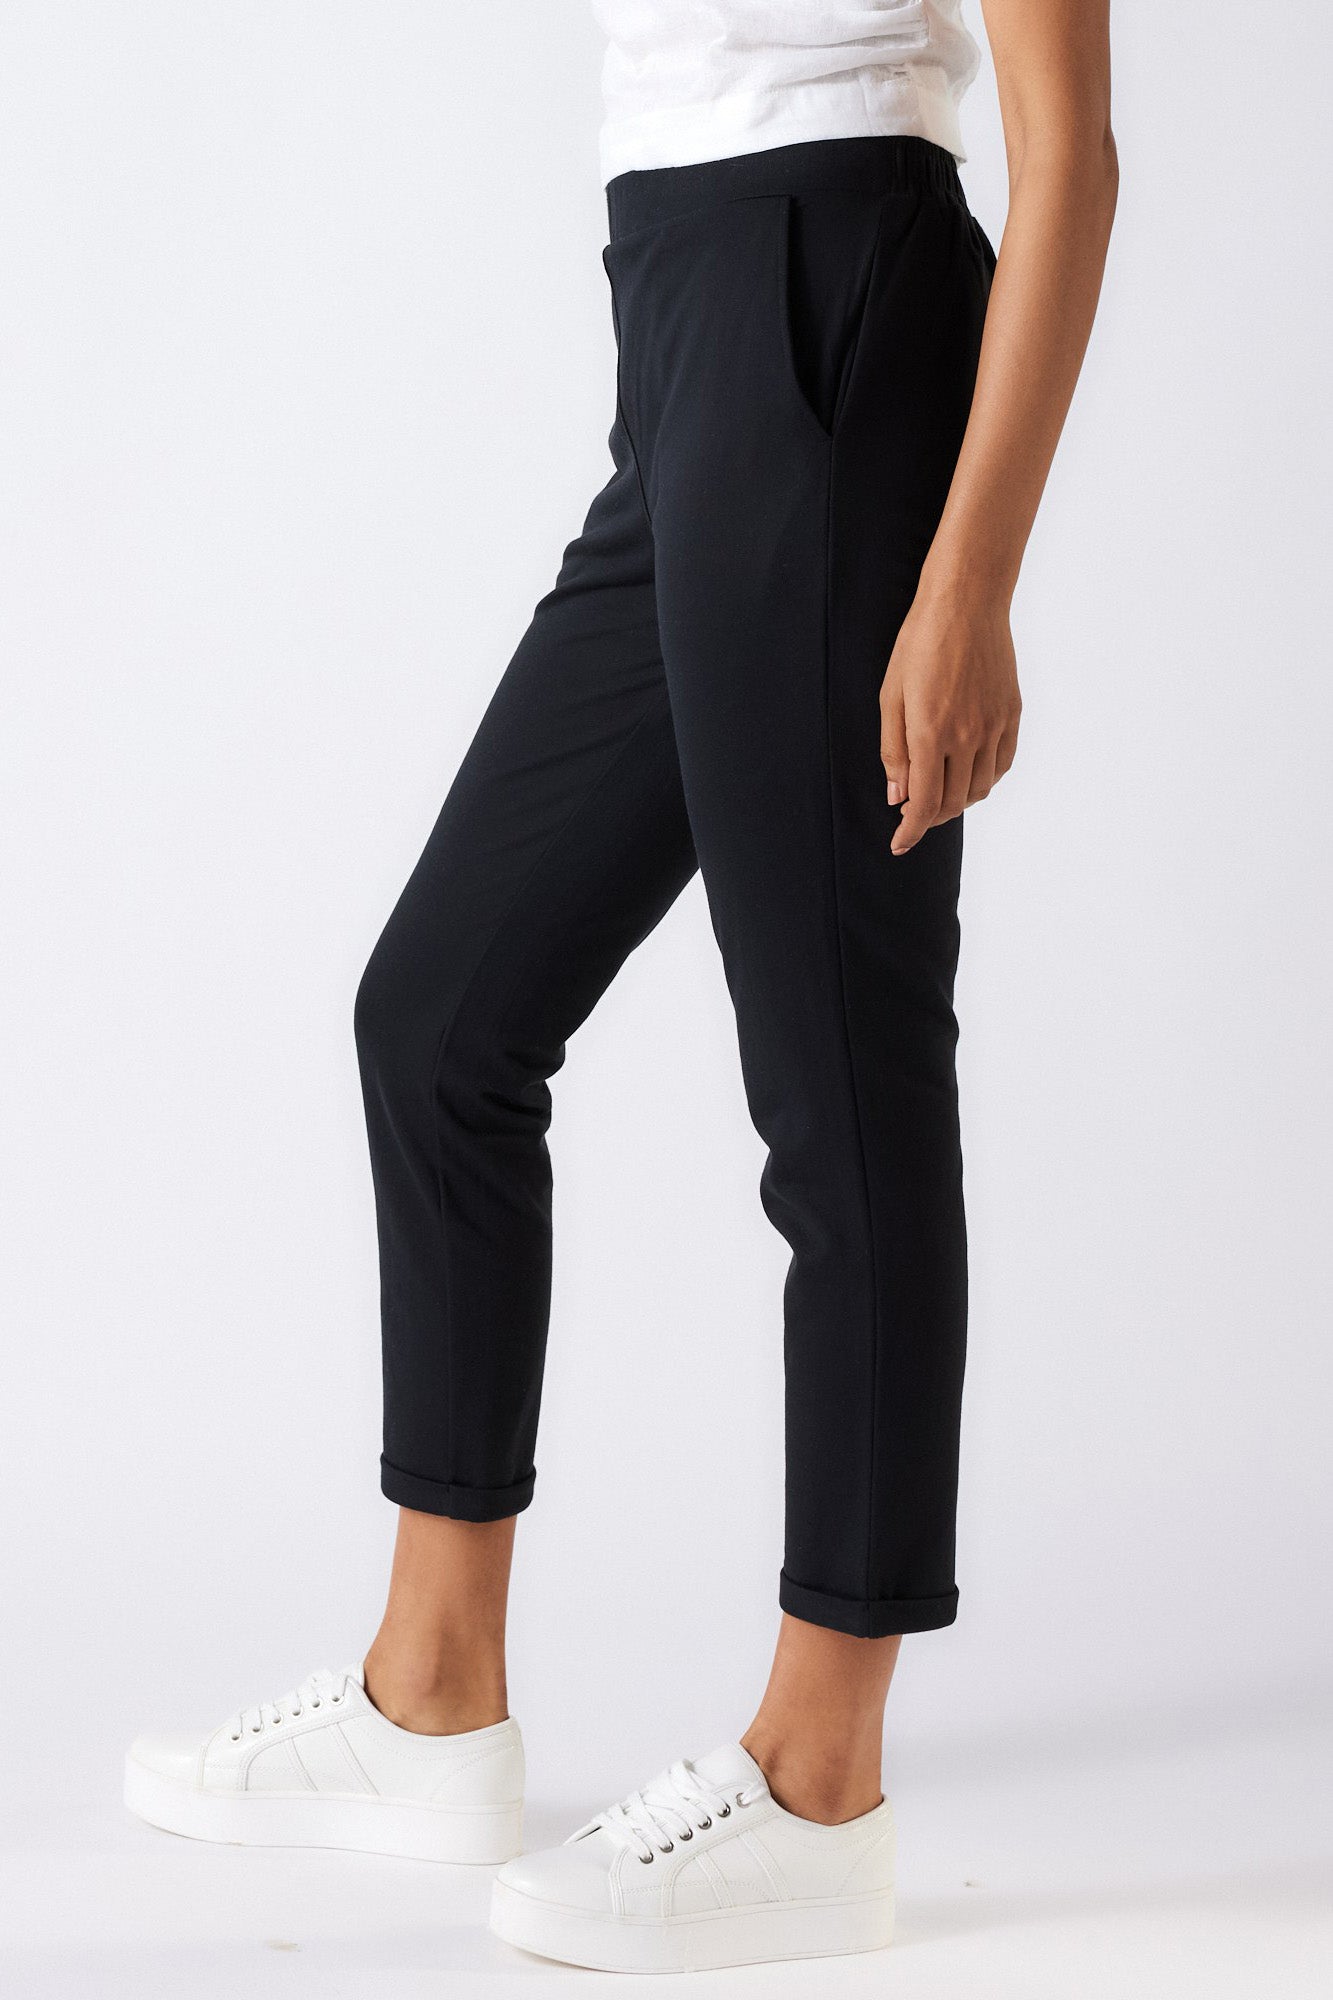 Buy Pima French Terry Women's Pants Carbon Black Online